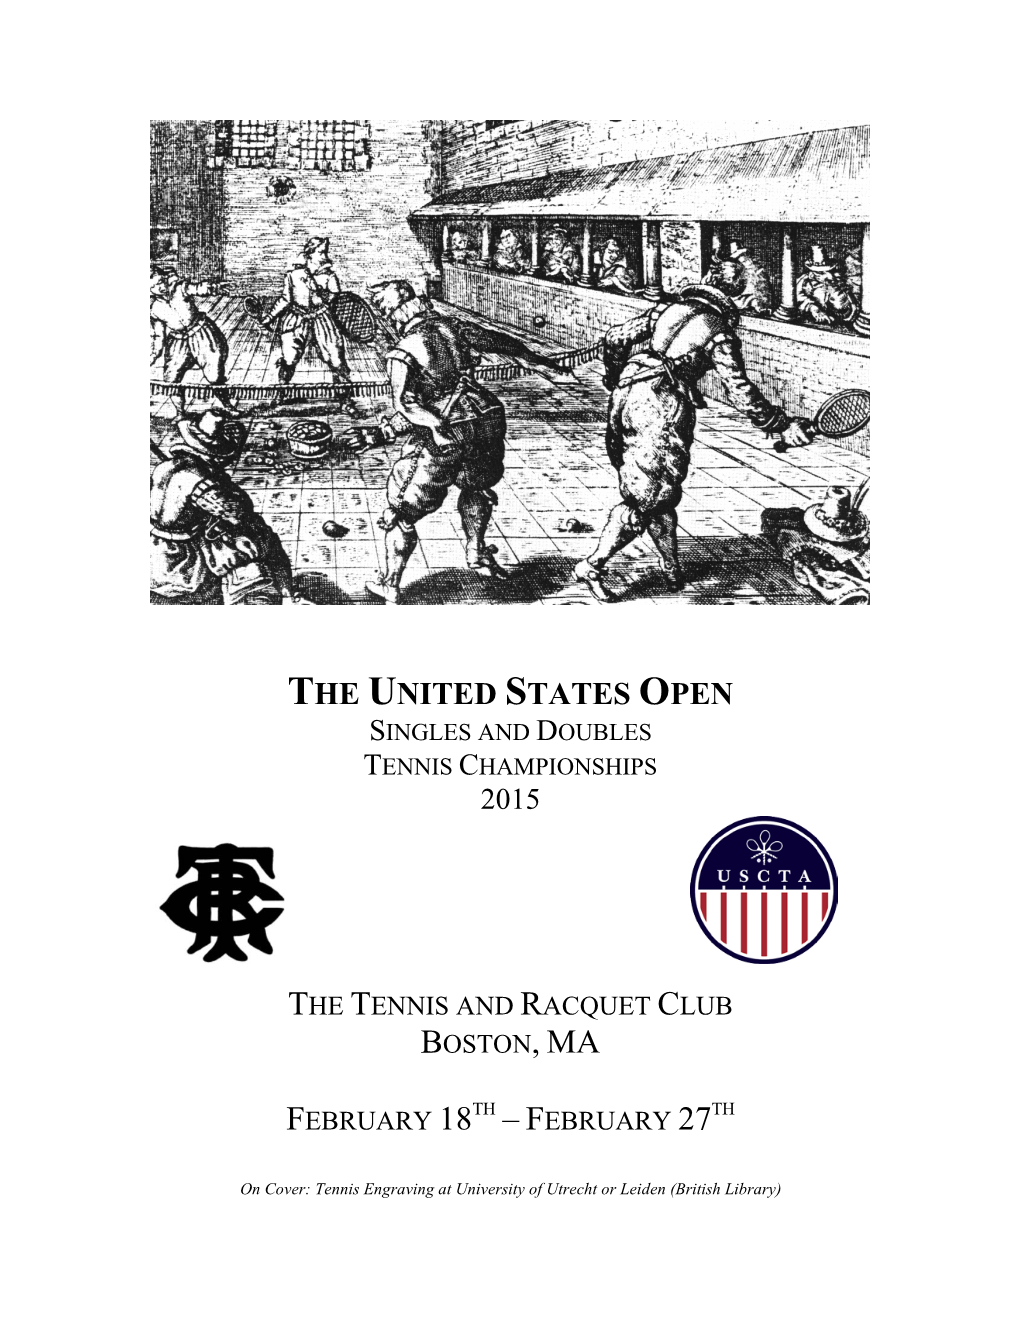 The United States Open Singles and Doubles Tennis Championships 2015